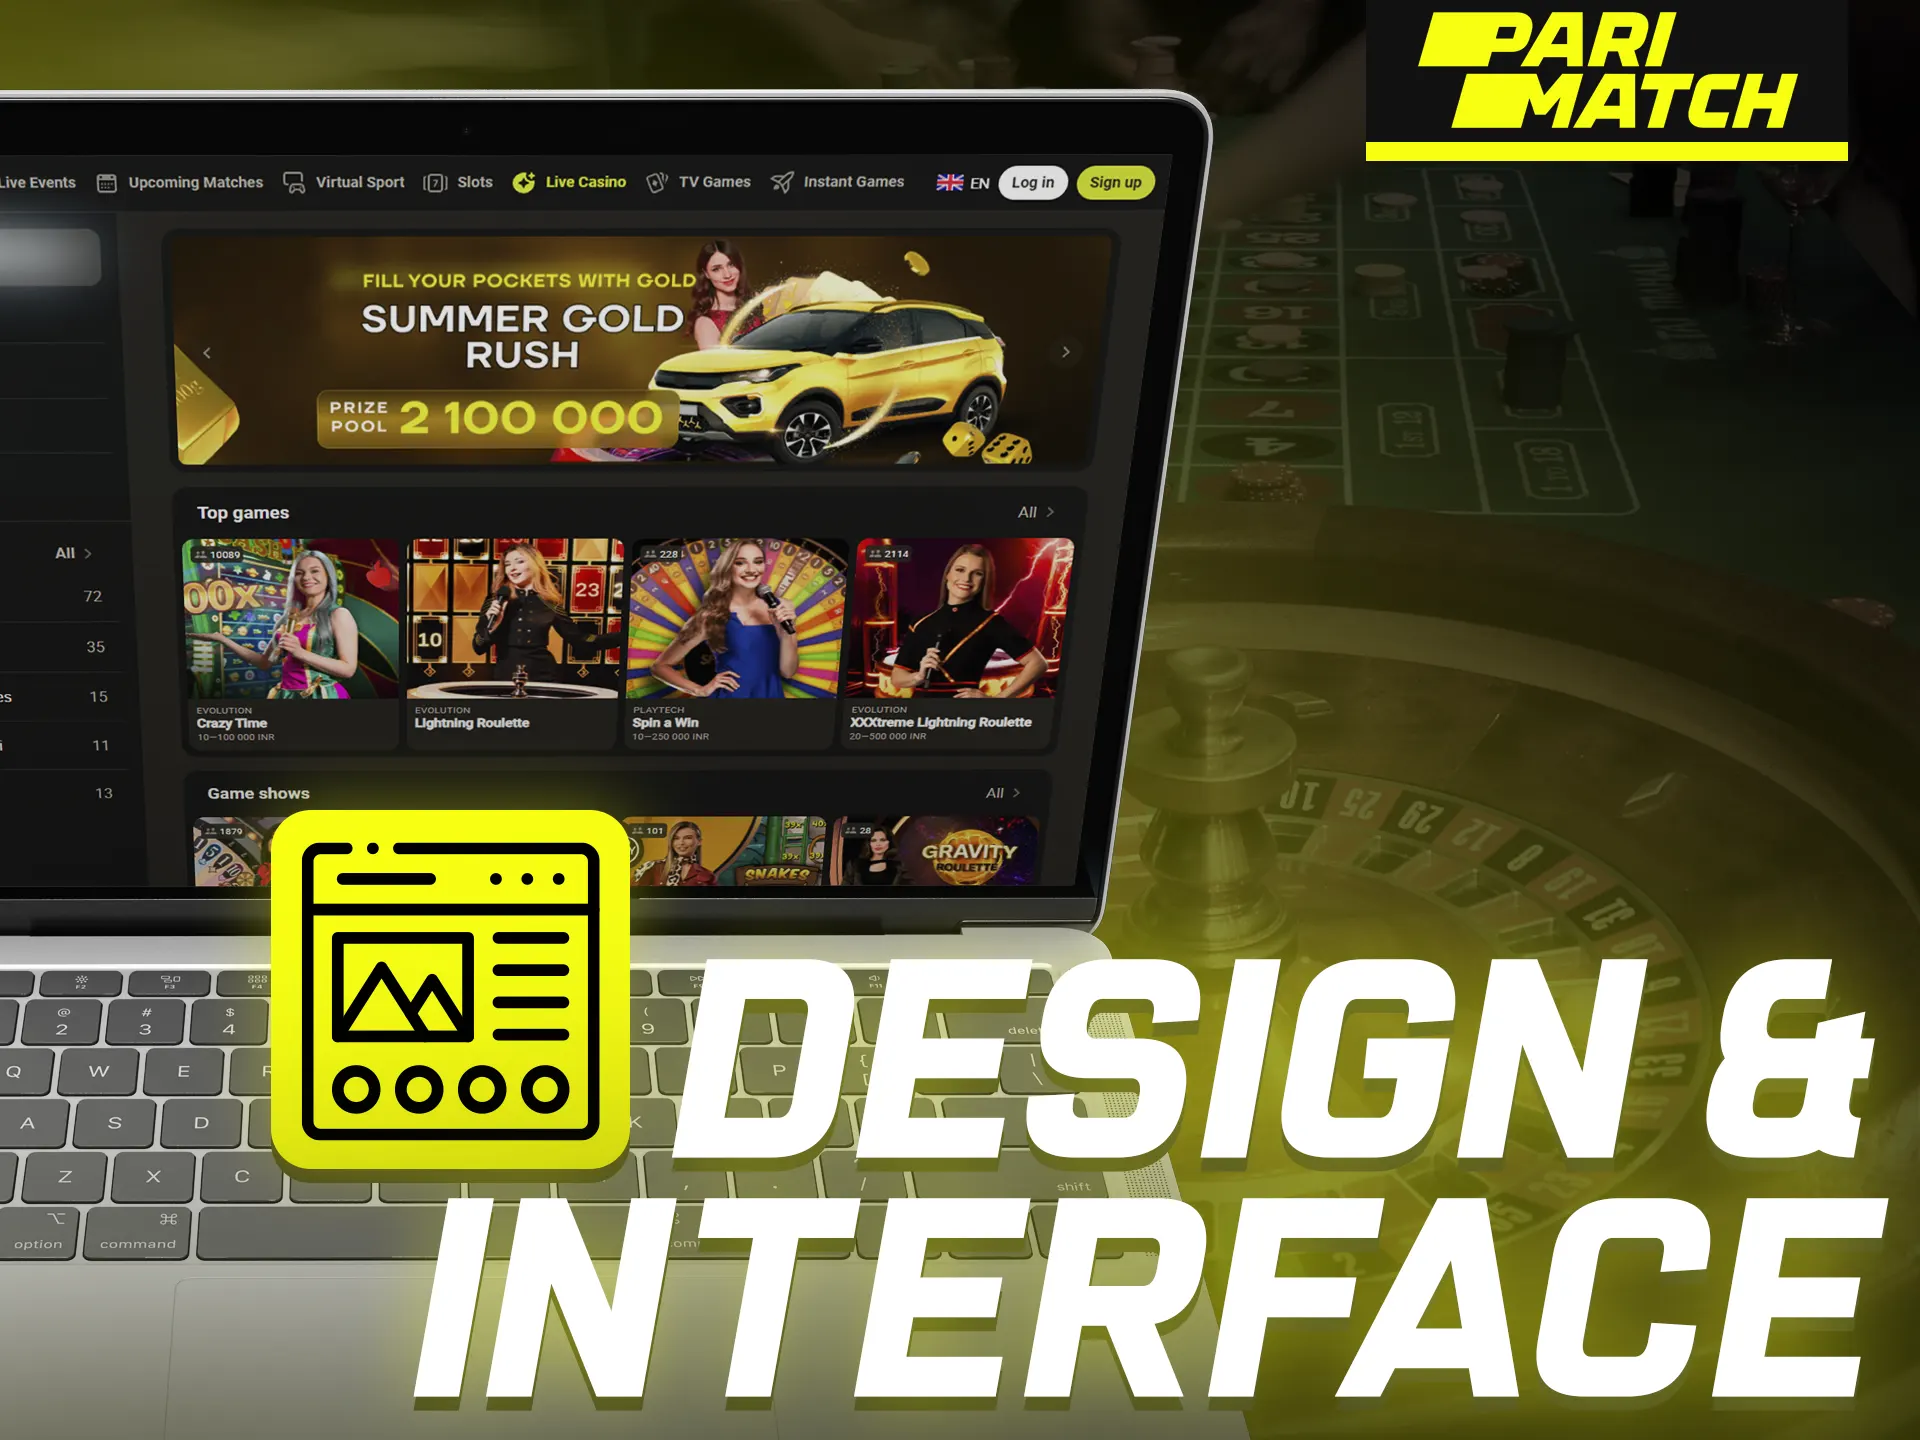 The Parimatch Casino platform's design and navigation make it very easy for customers to utilize.